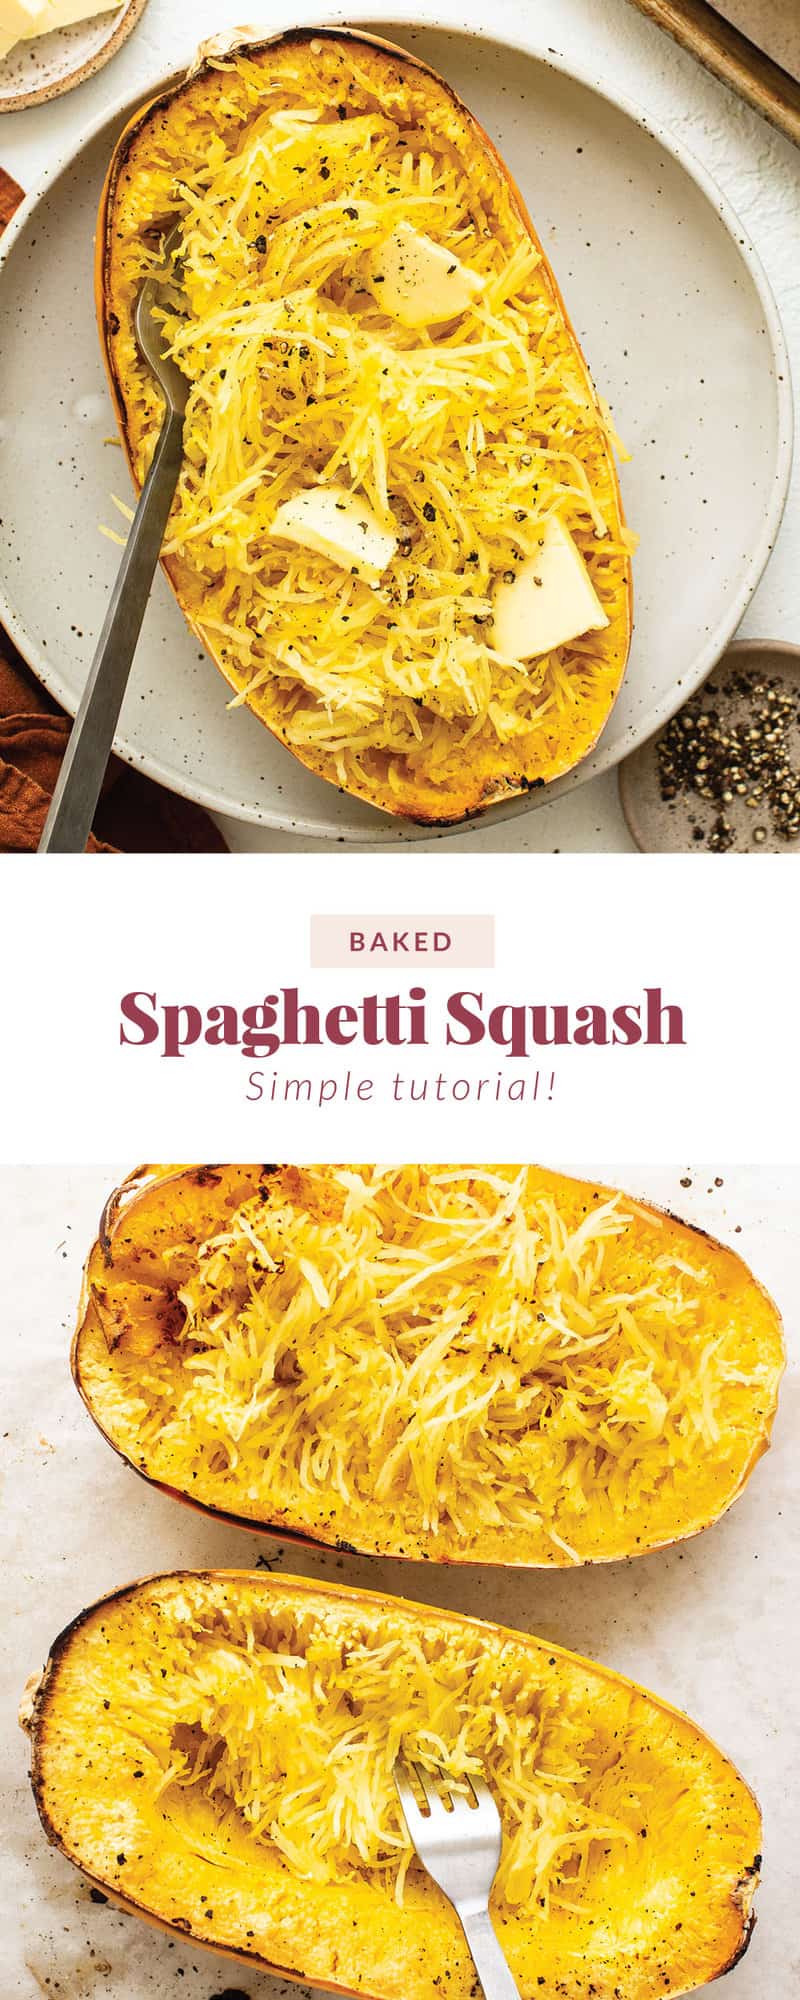 Simple Baked Spaghetti Squash - Fit Foodie Finds